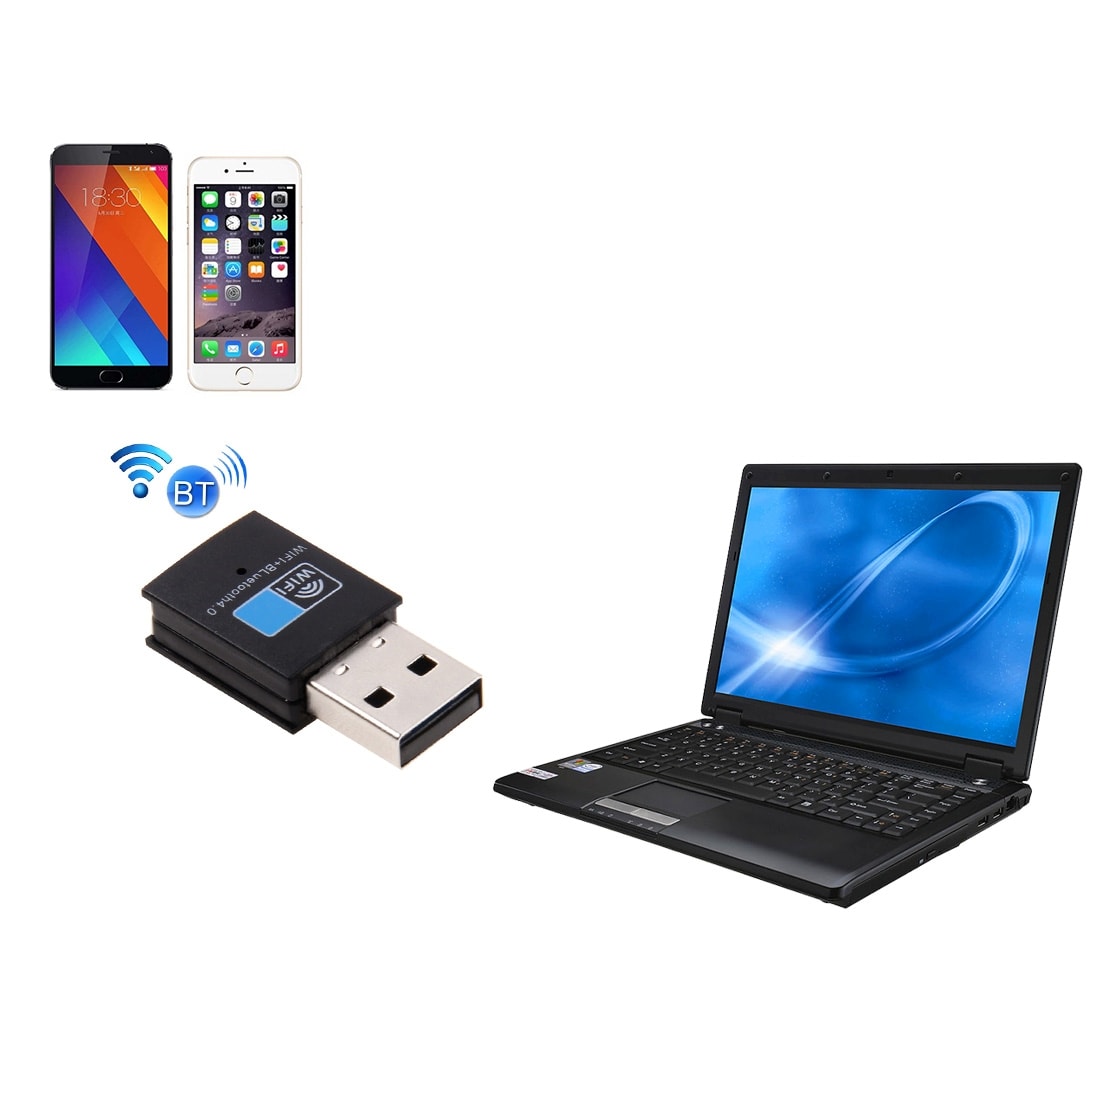 Bluetooth 4.0 + 150Mbps 2.4GHz USB WiFi Adapter